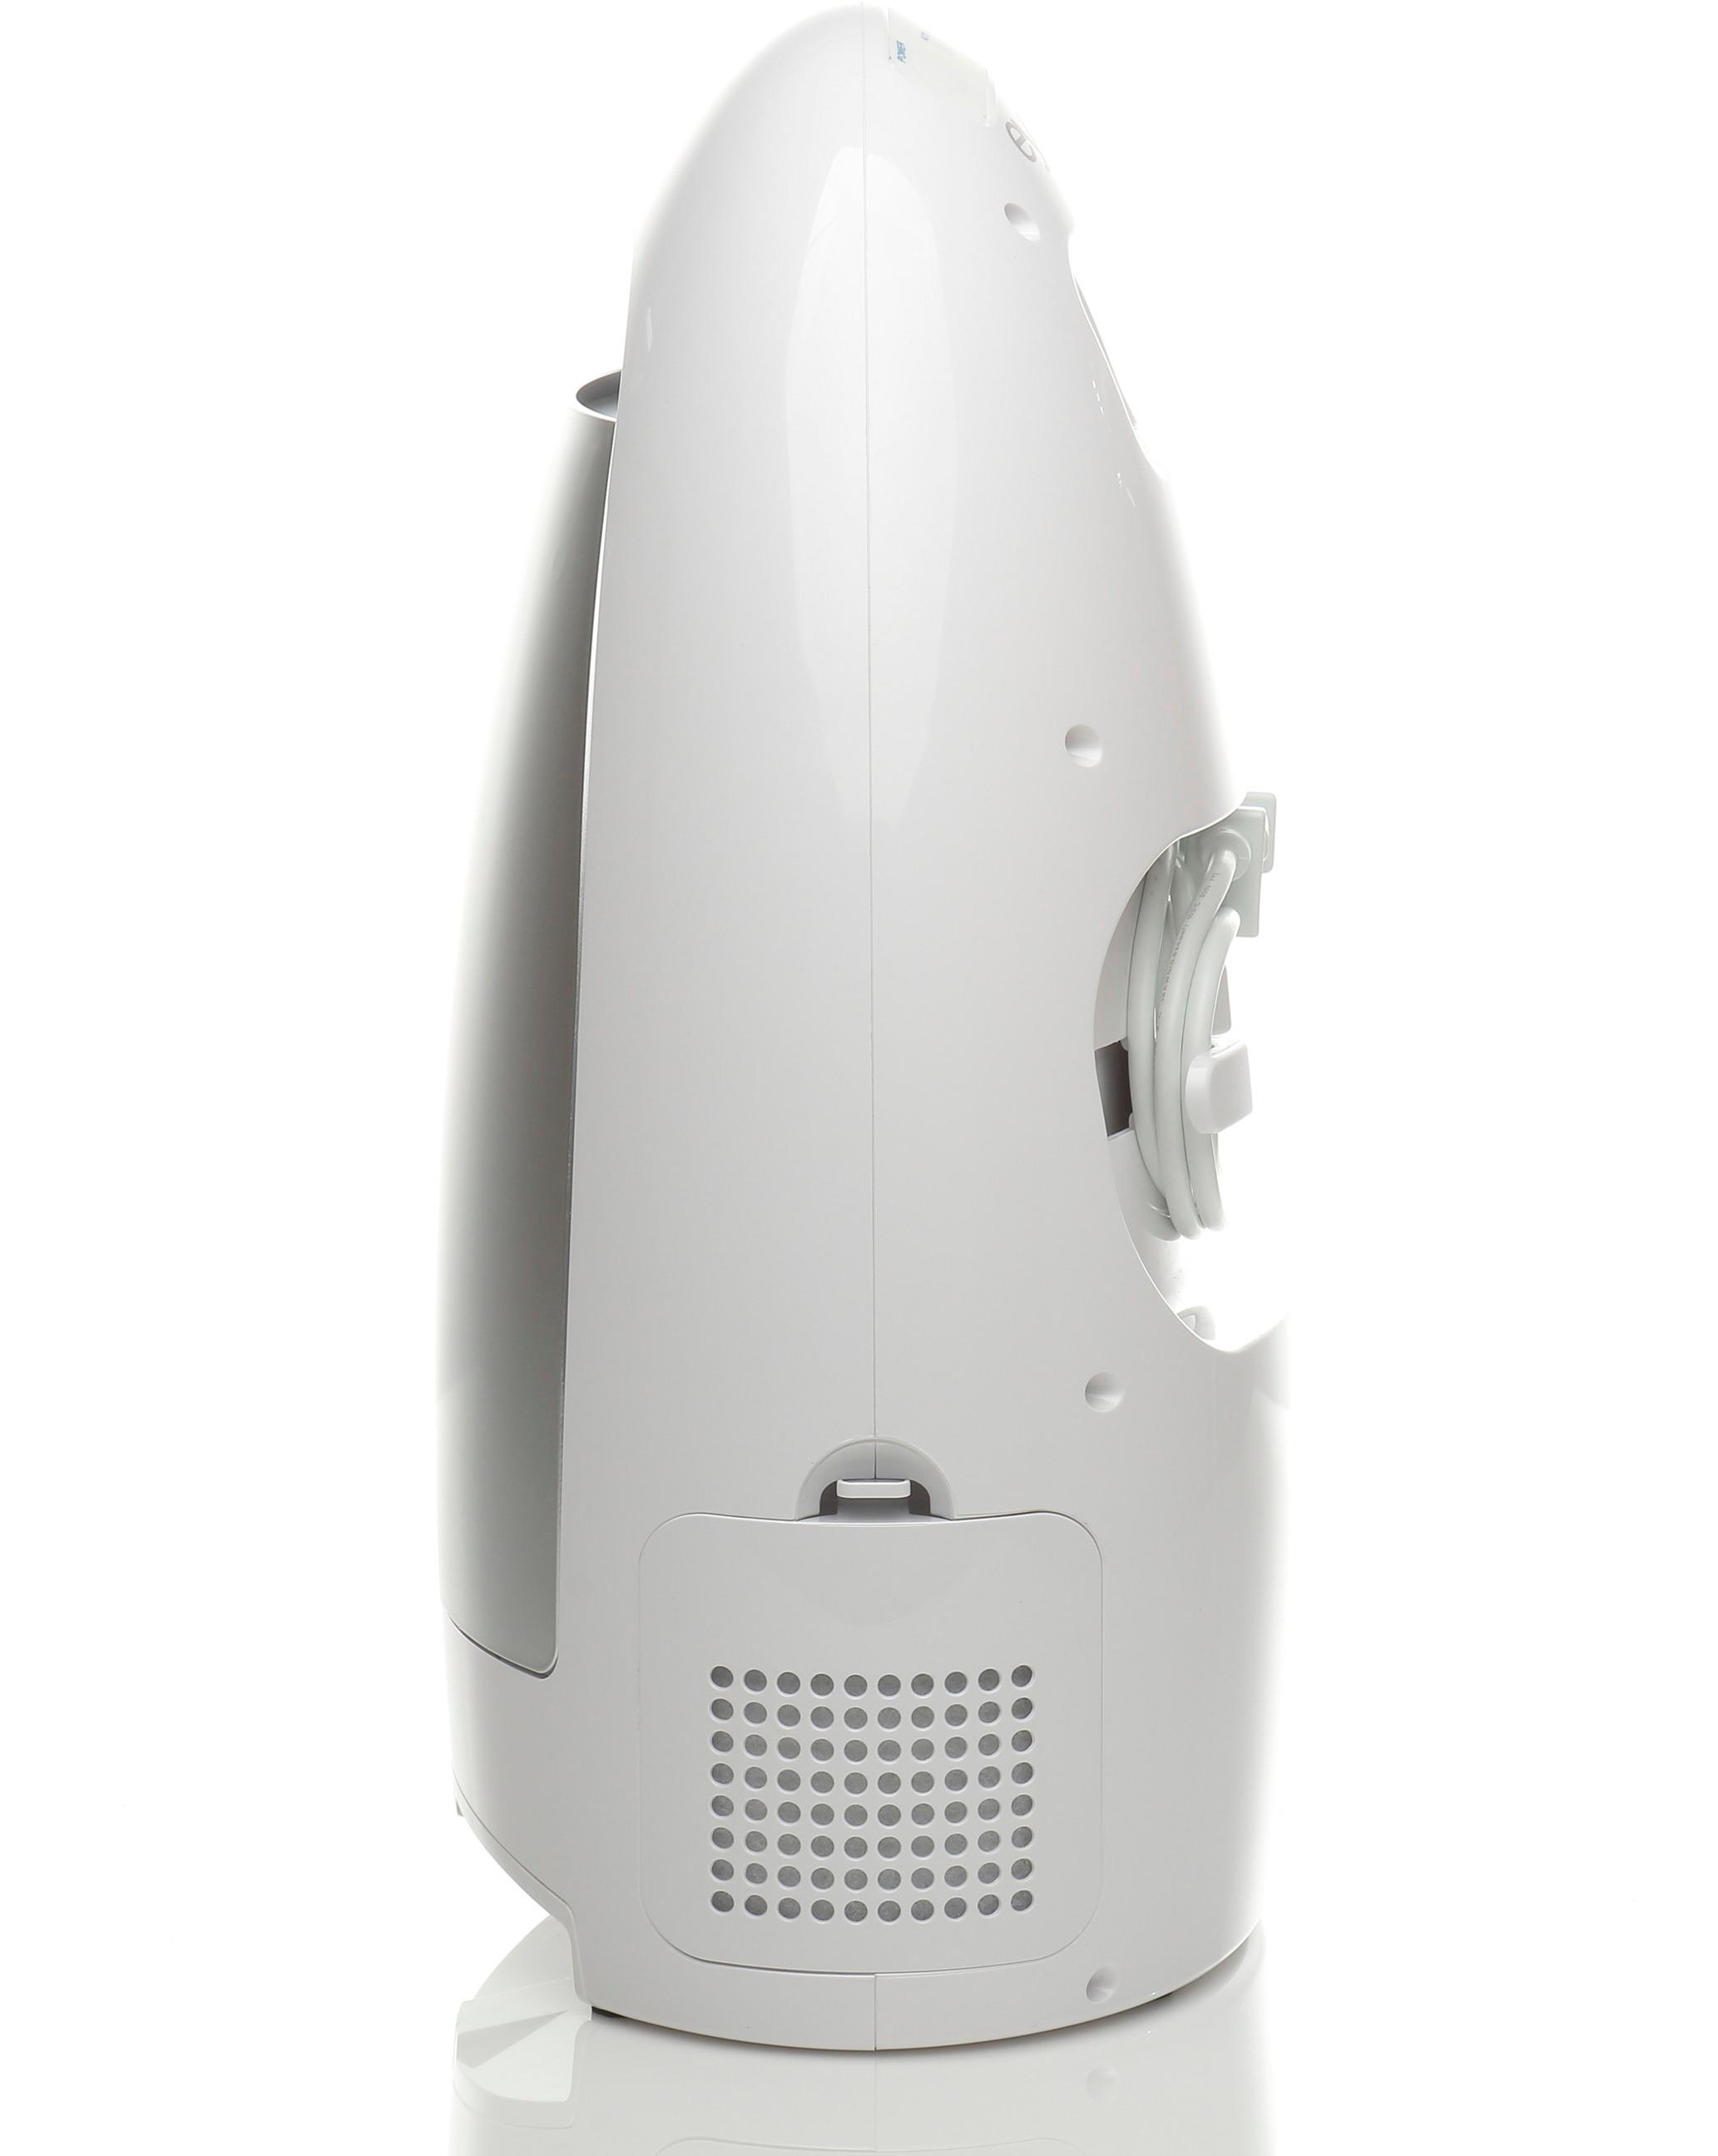 Left View: EyeVac - Home Touchless Vacuum - White